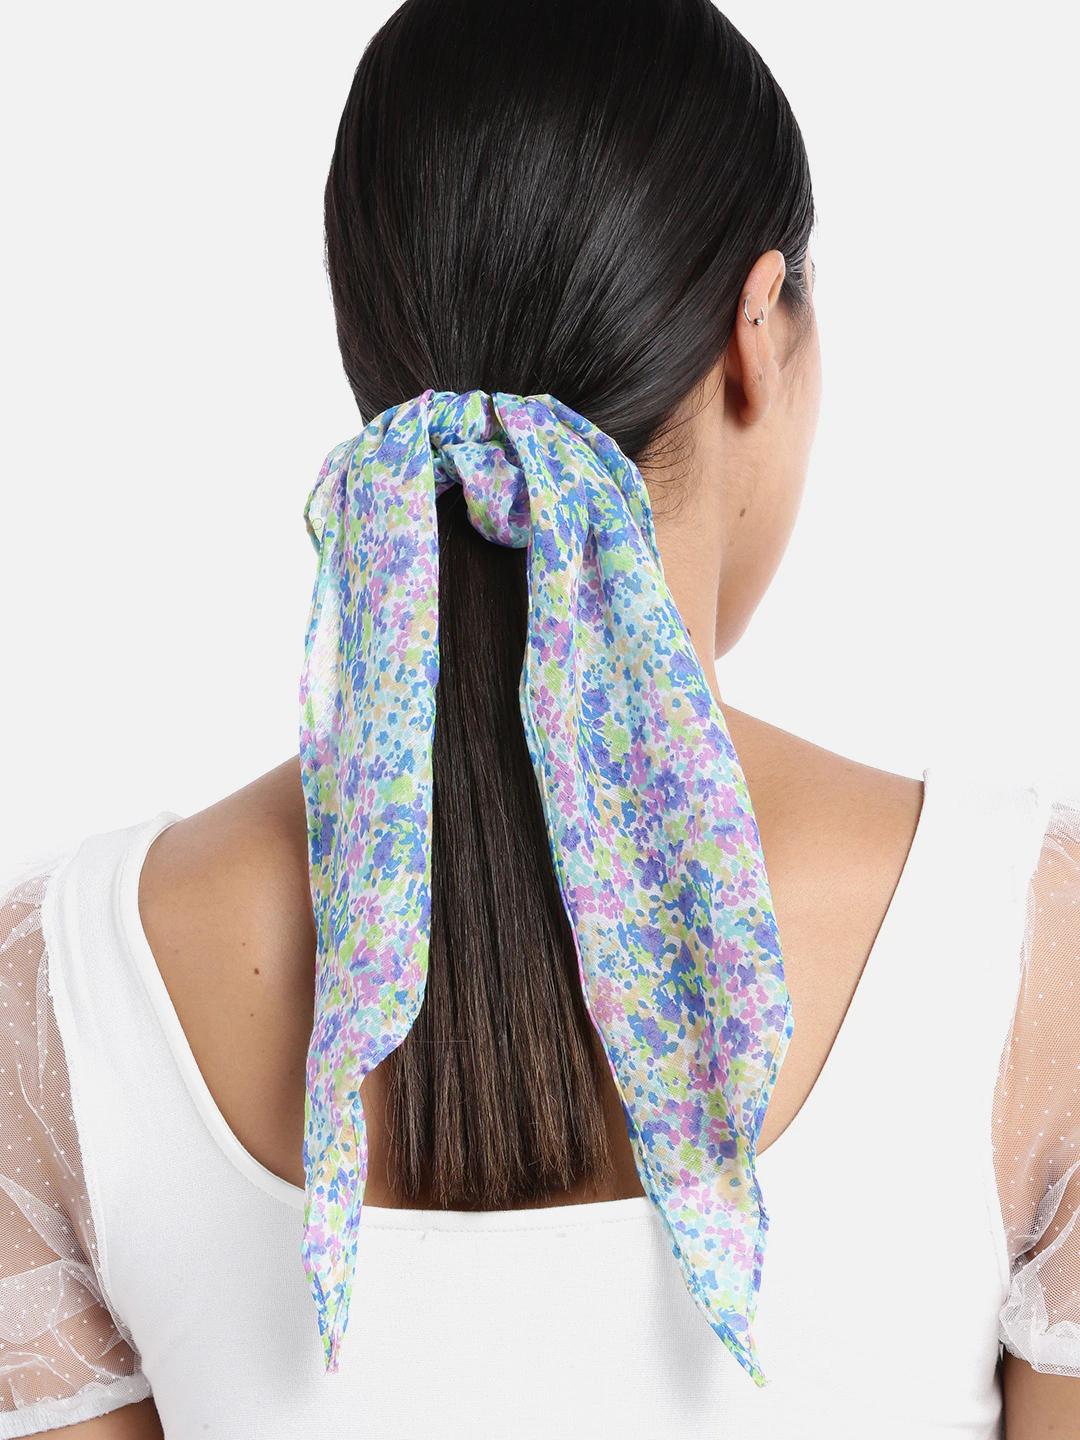 Blueberry floral printed Multi ruffle scrunchie